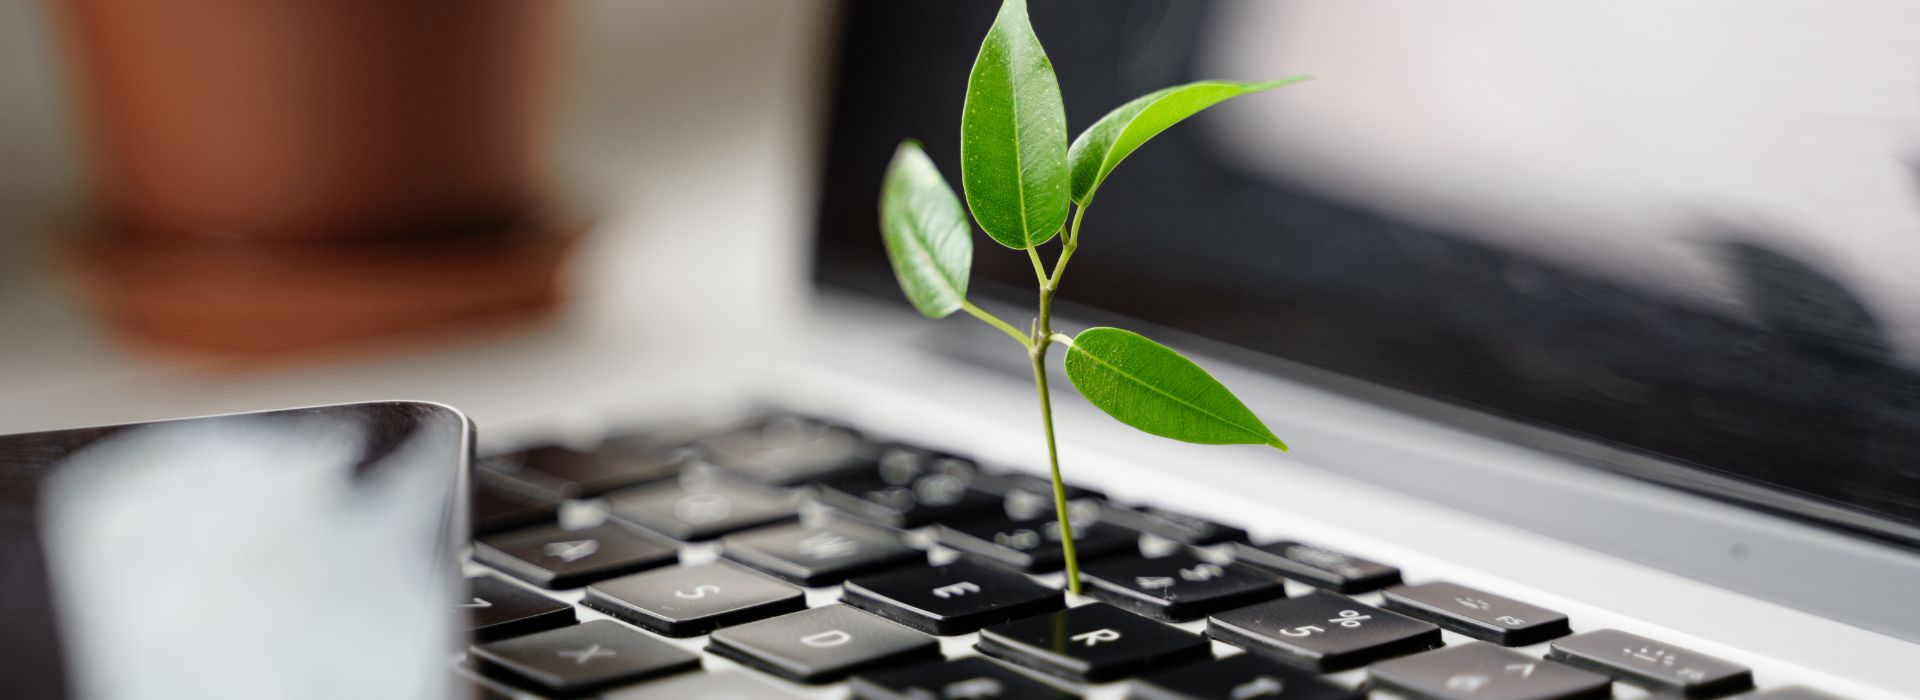 Tiny plant growing out of a laptop keyboard